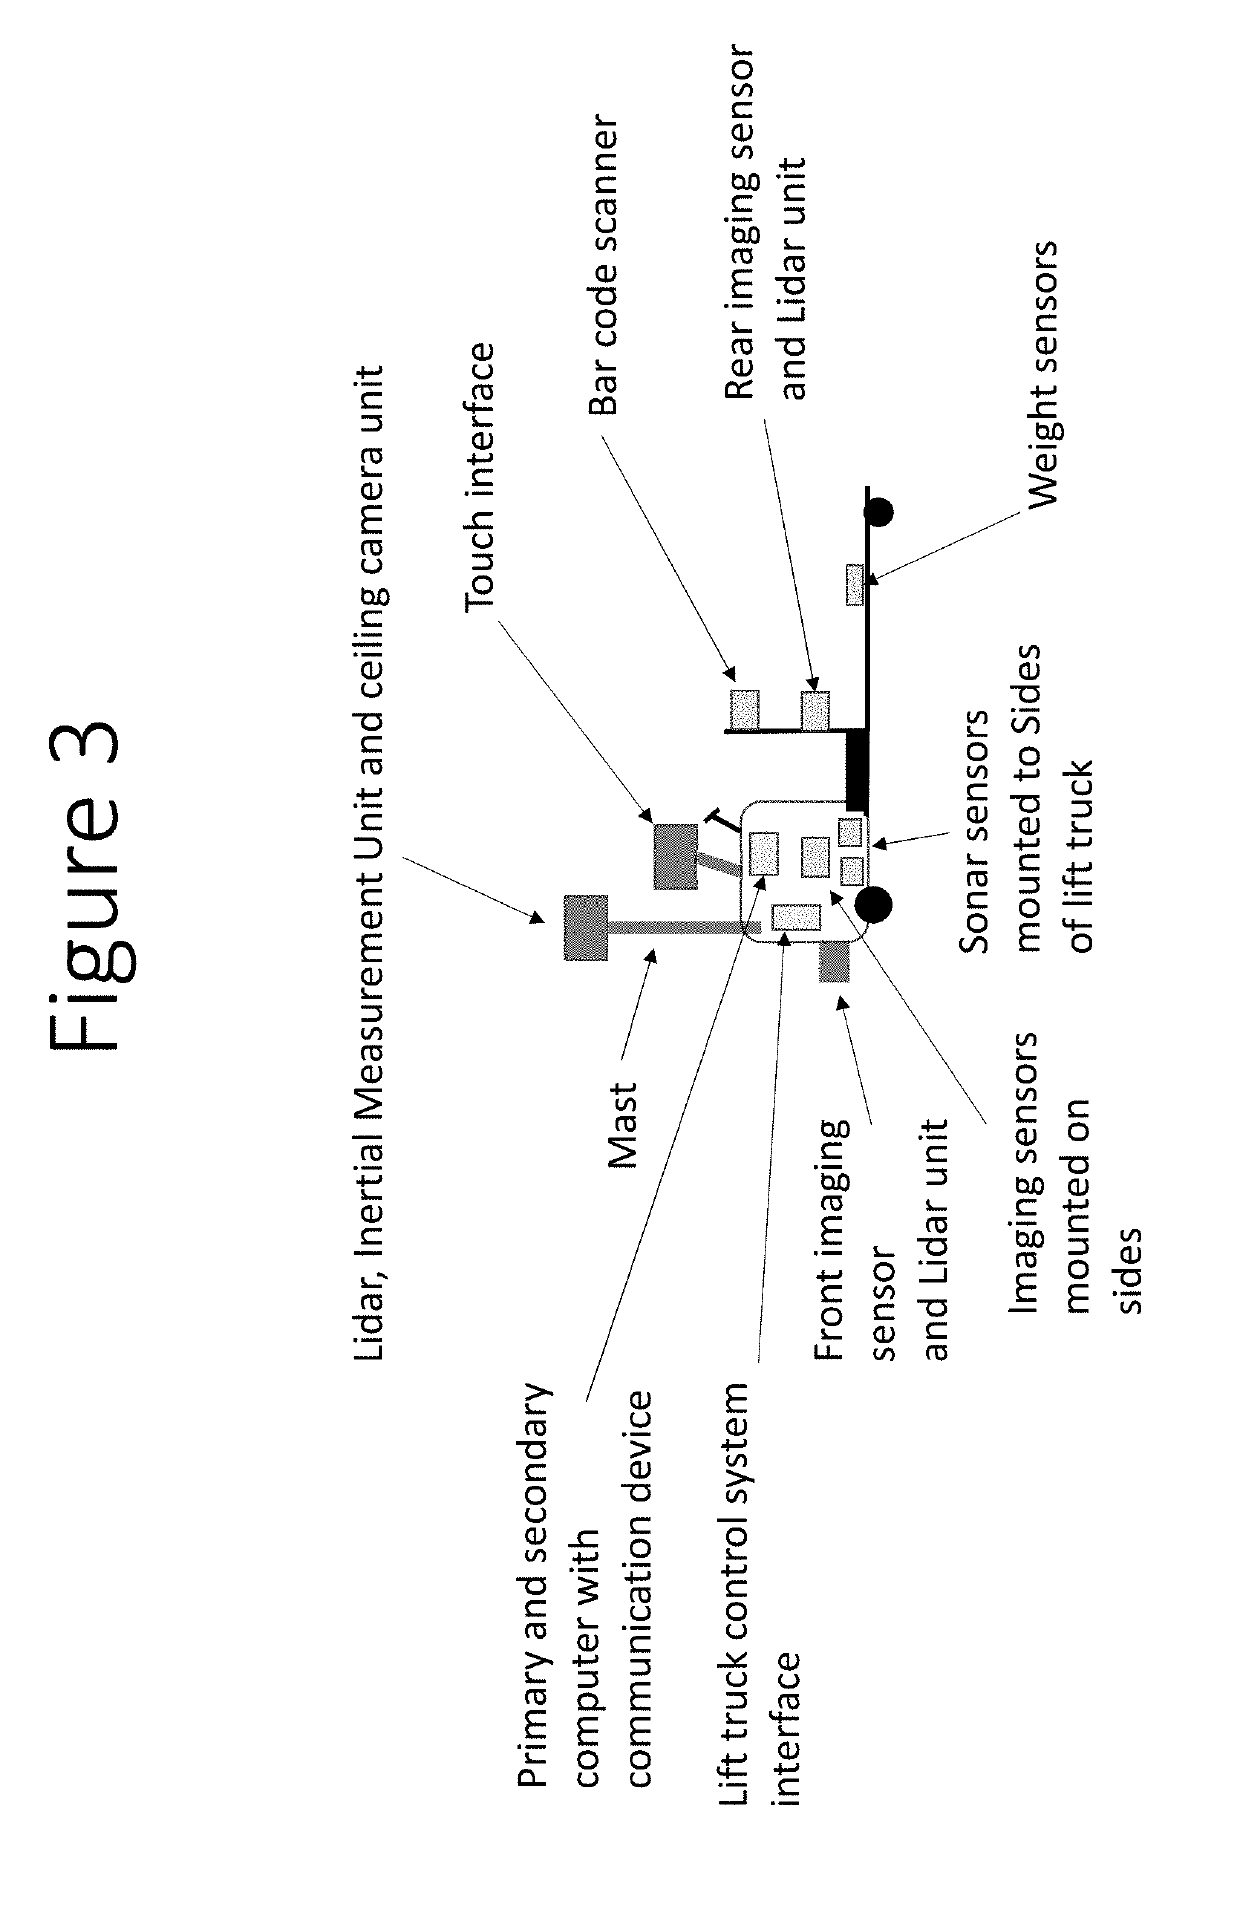 Method and system to retrofit industrial lift trucks for automated material handling in supply chain and logistics operations